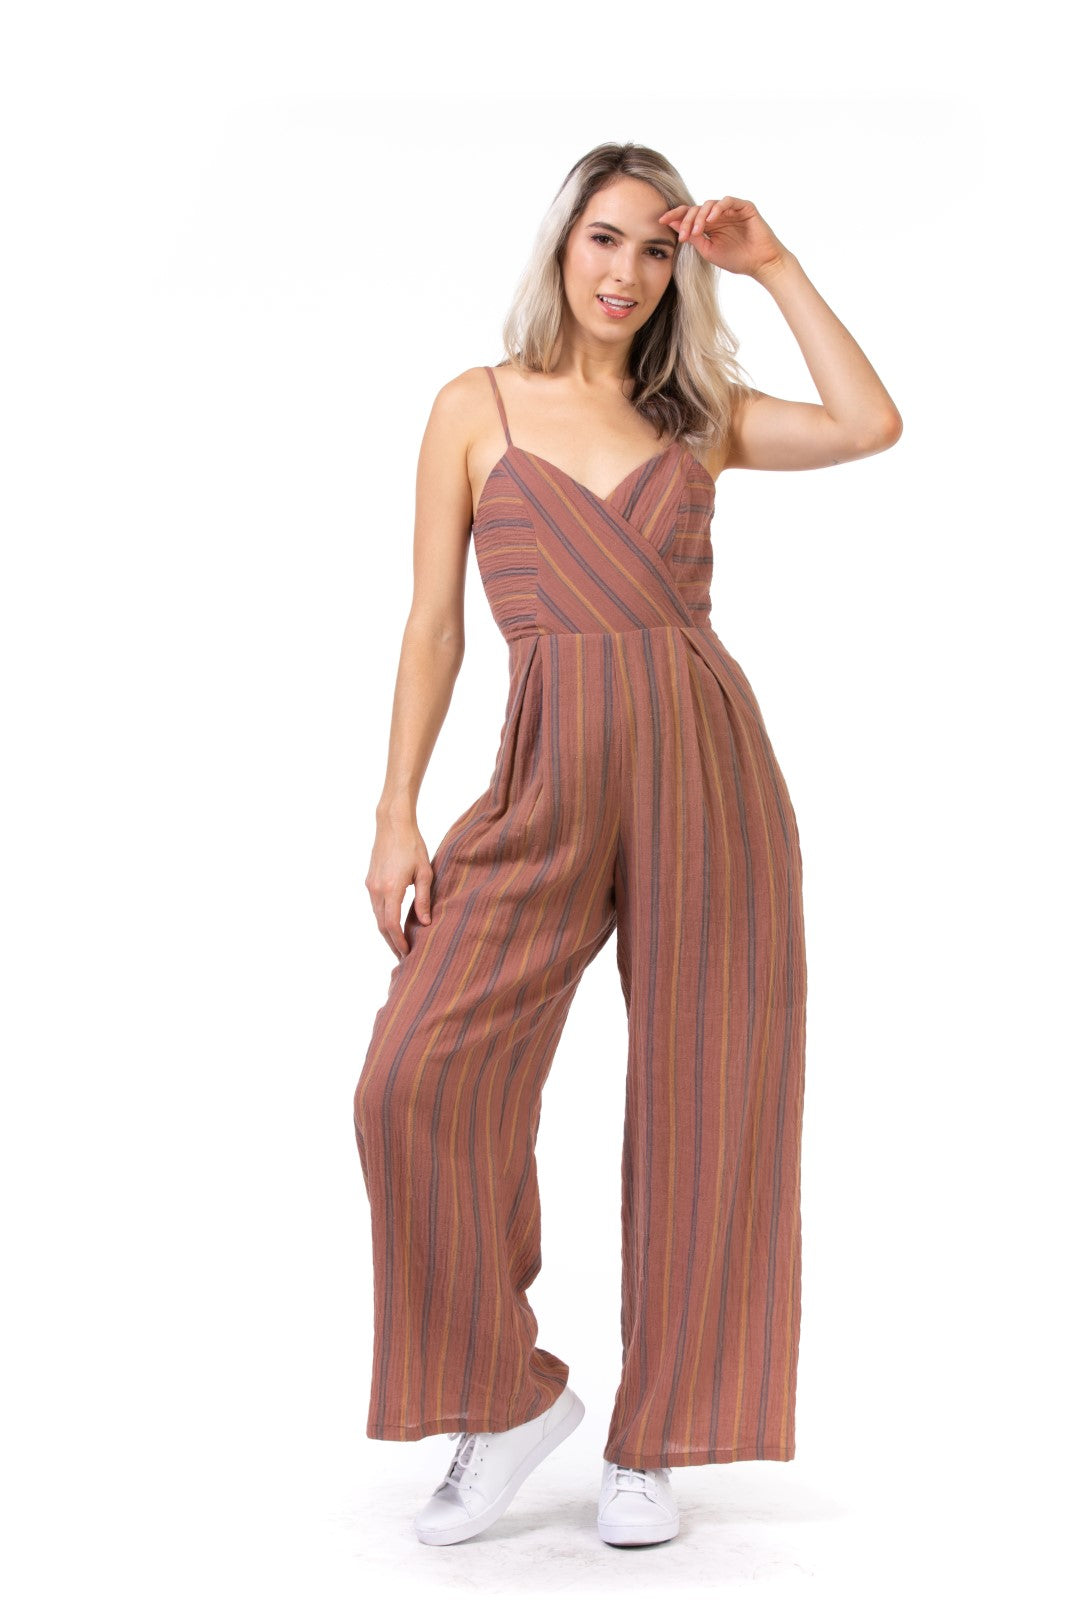 EDGY Land Girl's and Women's Cami High Waist Wrap Over Slit Pocket Pleated Stripe Tank Jumpsuit